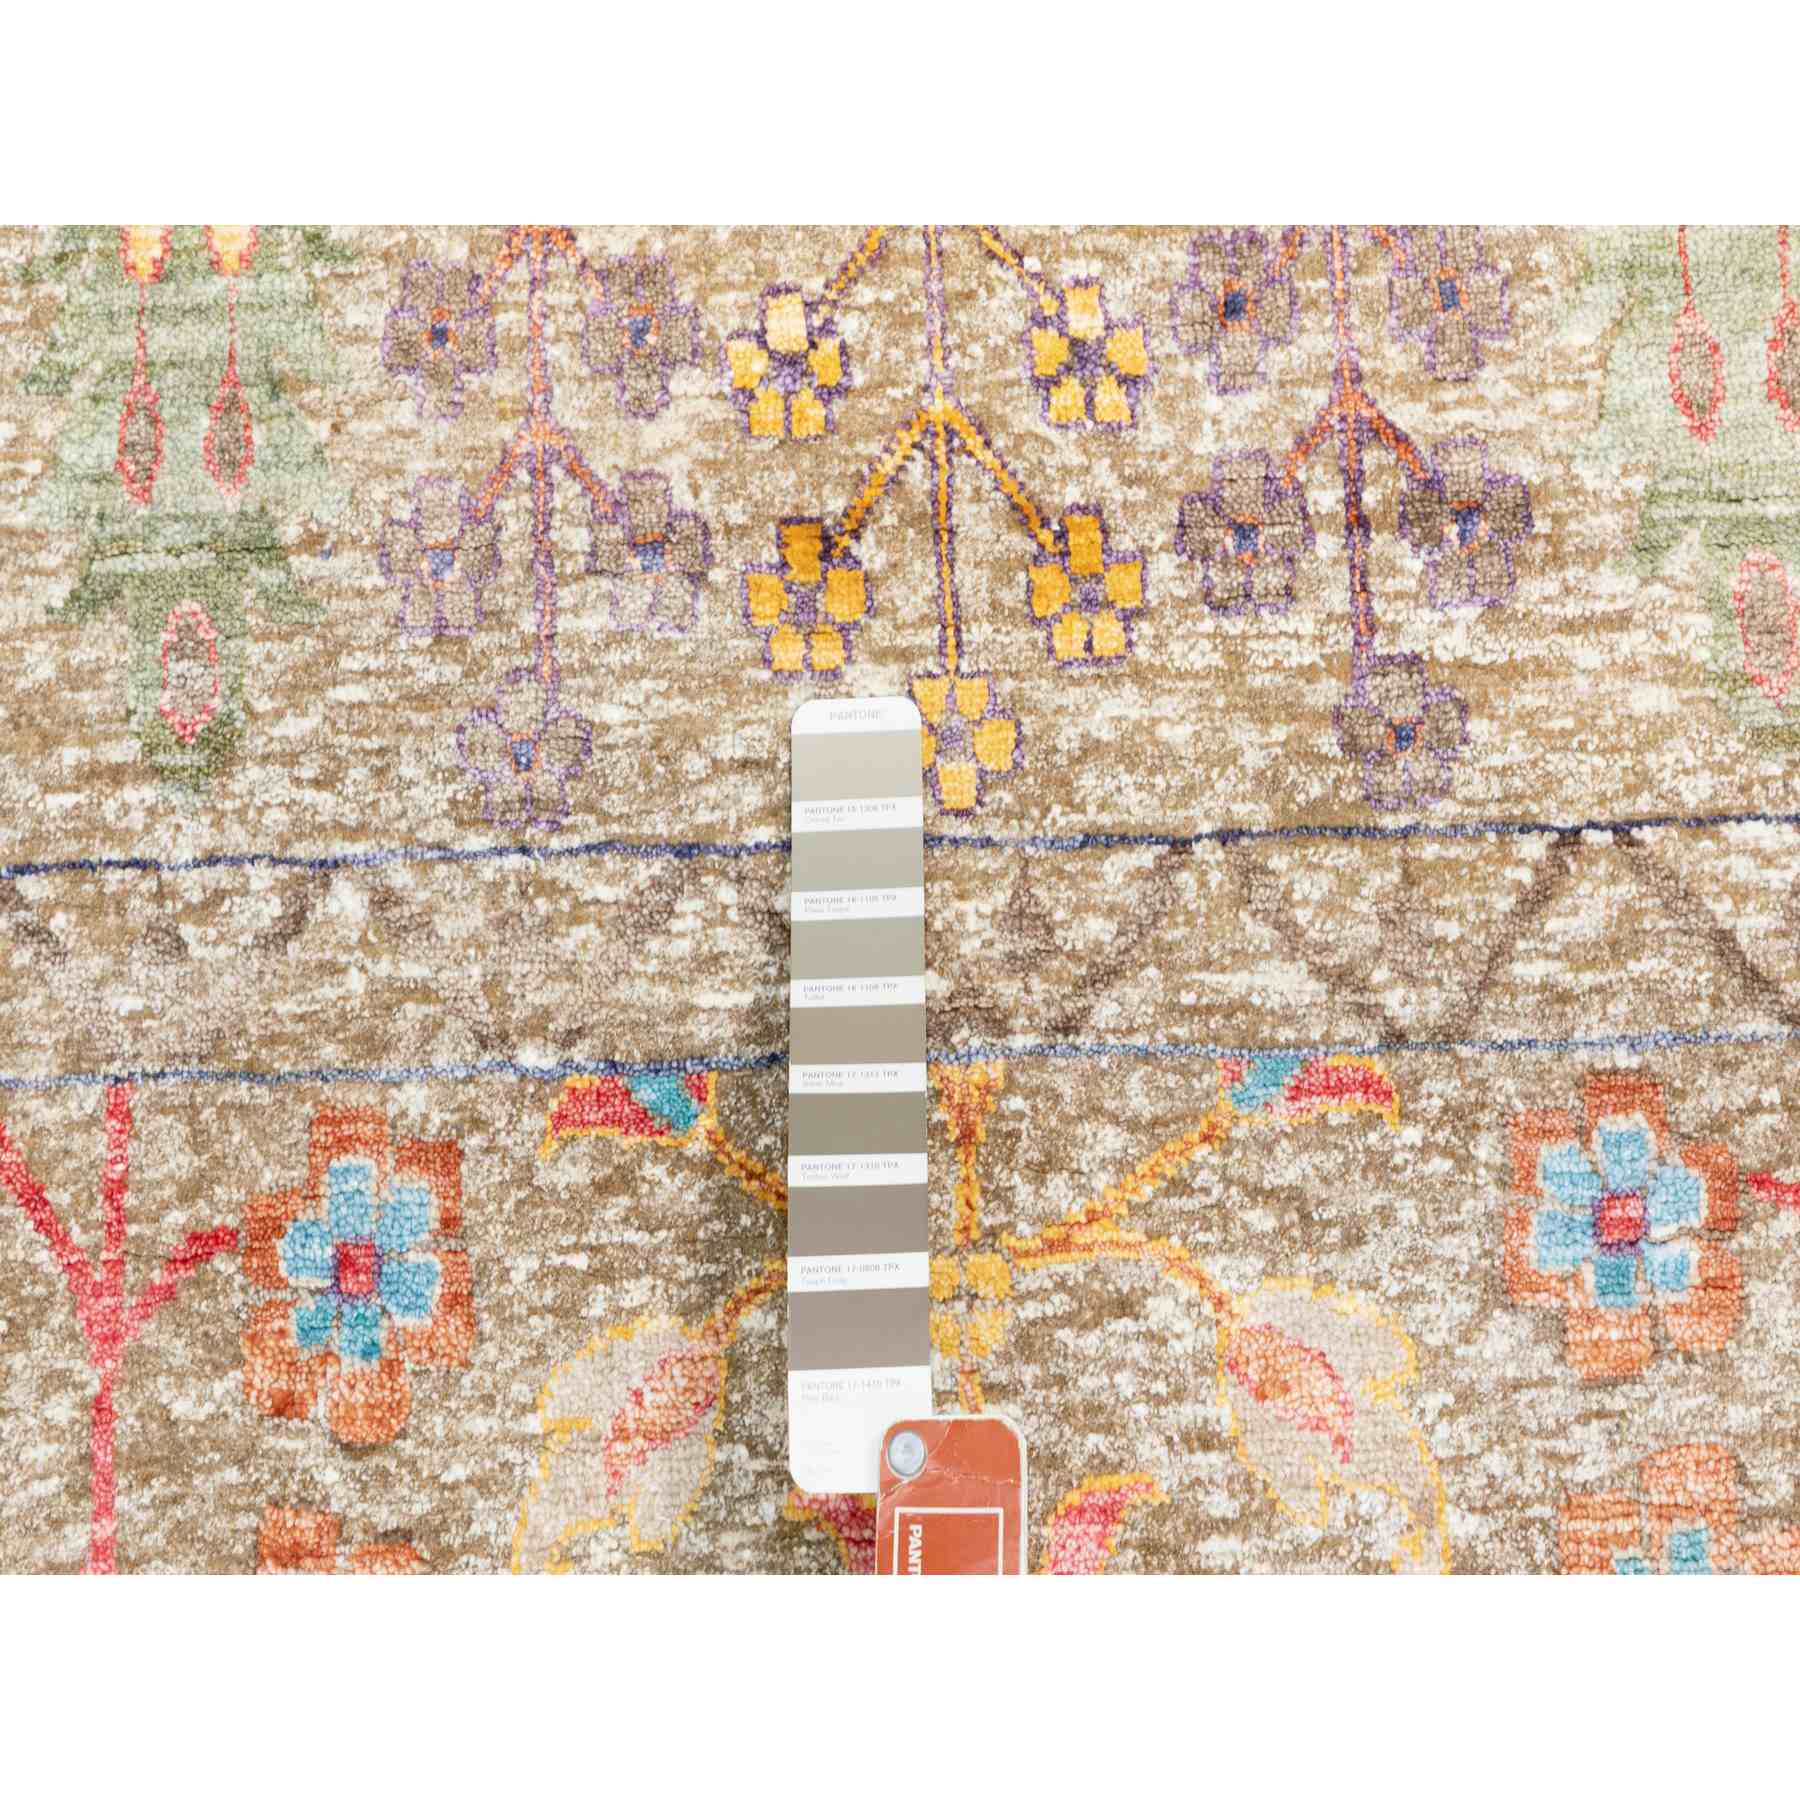 Wool-and-Silk-Hand-Knotted-Rug-294835